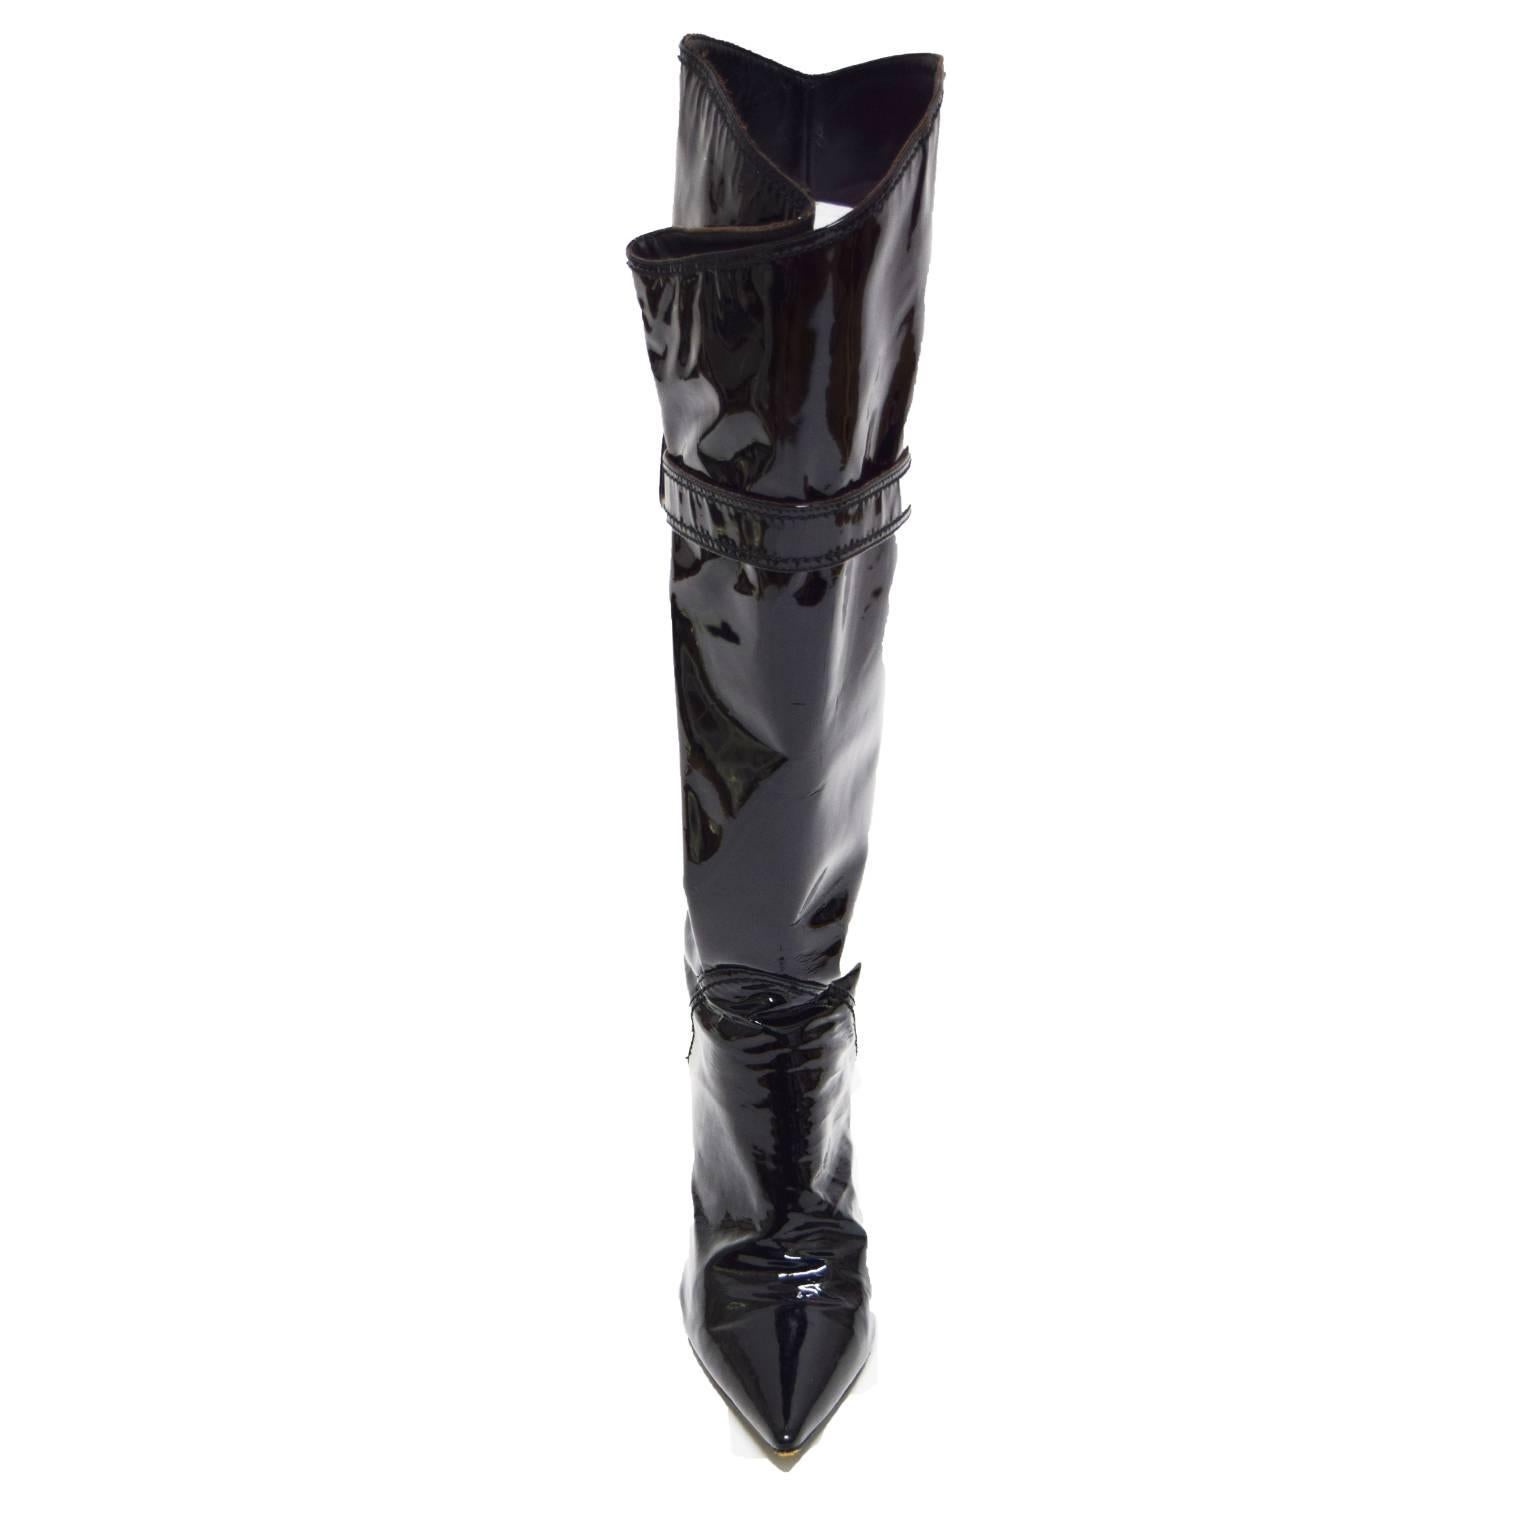 These sexy boots by Sergio Rossi, are made of black patent leather and have a front flap that pleats on the outside when buckled by strap. The toe is pointed and the heel is 3.5 in inches. The sole is textured leather and the shaft hits right below